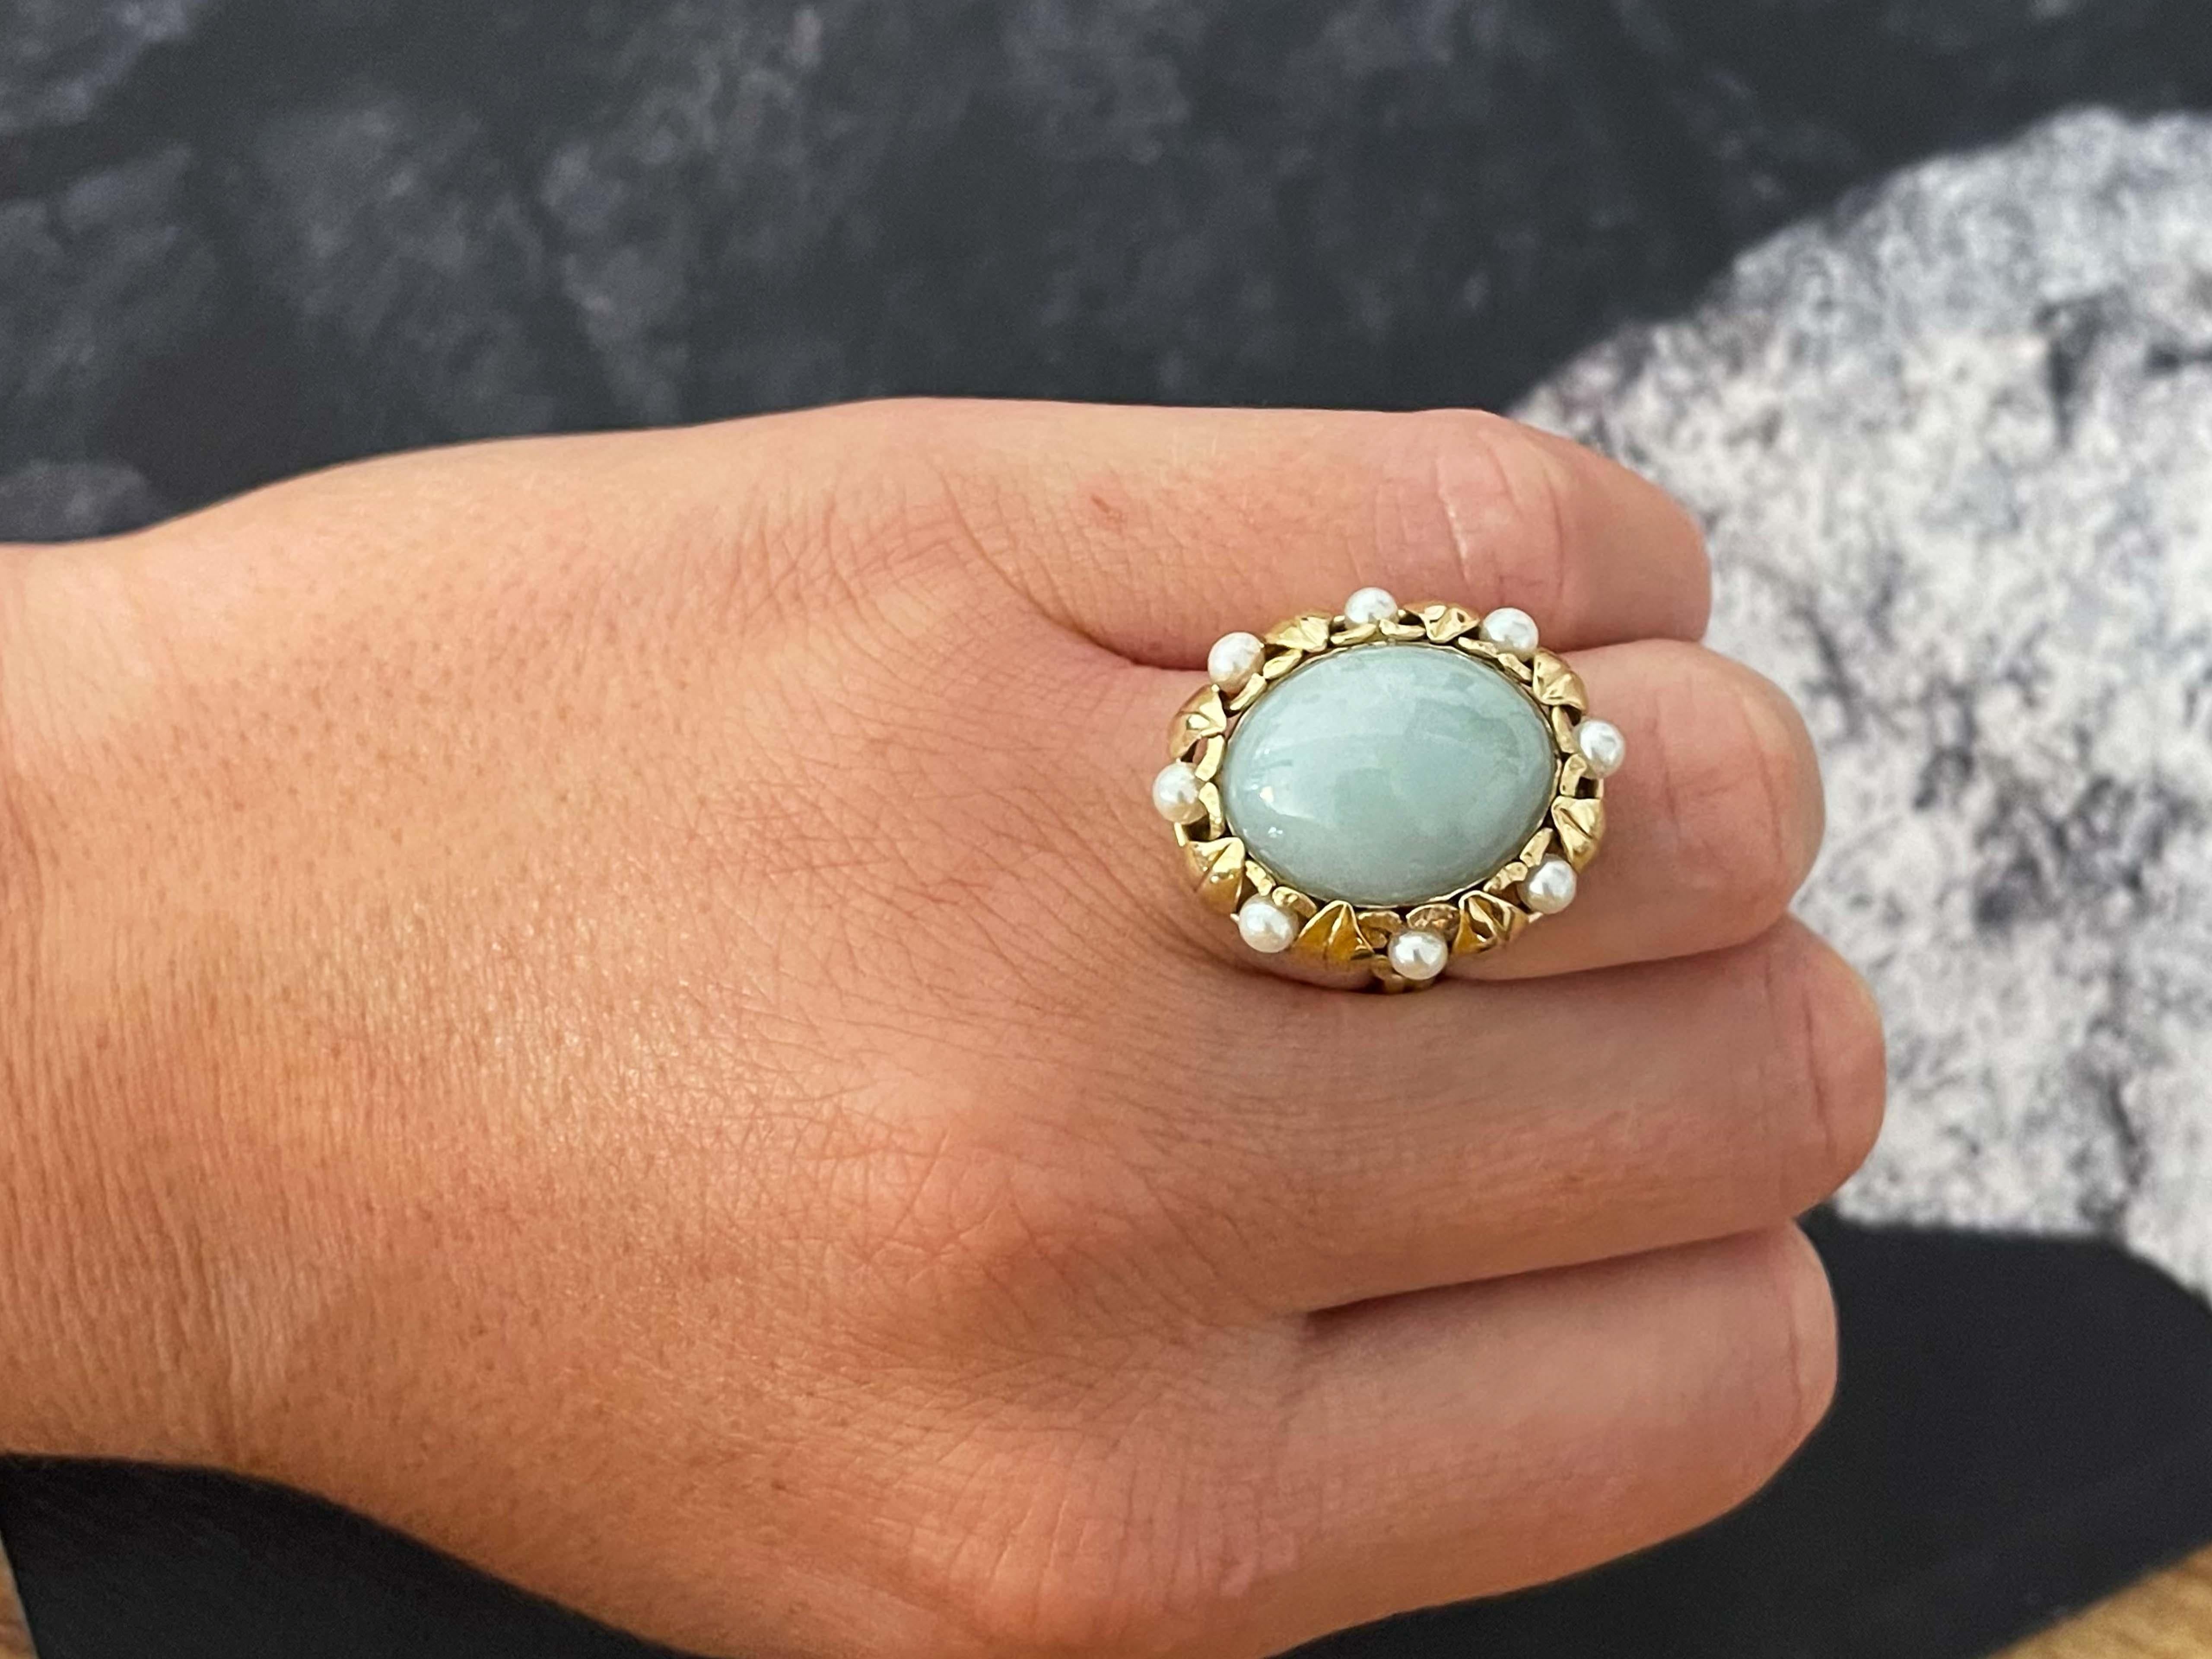 Ring Specifications:

Designer: Ming's

Stone: Pearl and Jade

Metal: 14k Yellow Gold

Total Weight: 10.7 Grams

Ring Size: 6.25 (resizable)

Stamped: 